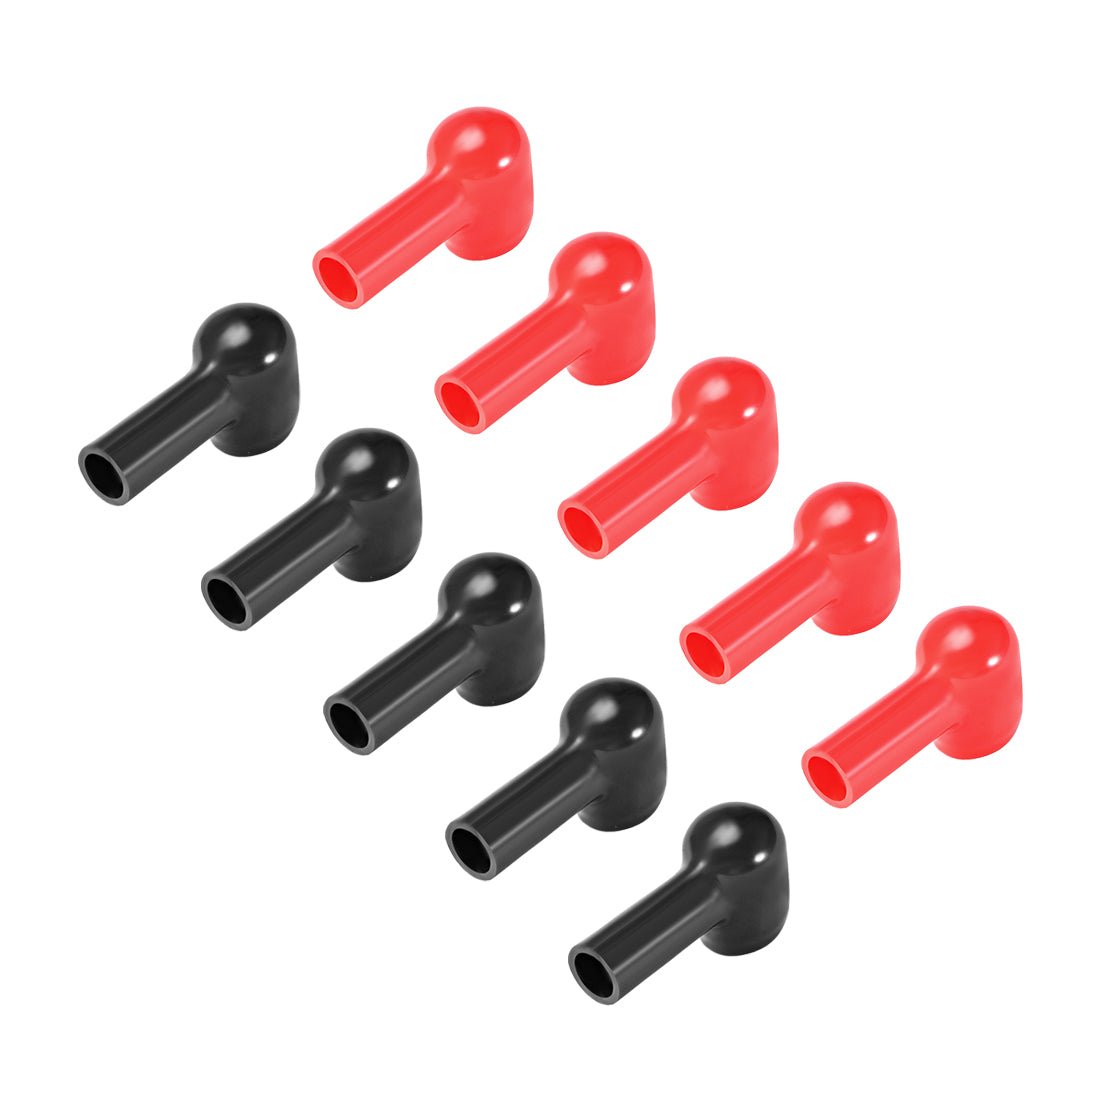 uxcell Uxcell Battery Terminal Insulating Rubber Protector Covers for 14mm Terminal 8mm Cable Red Black 5 Pairs